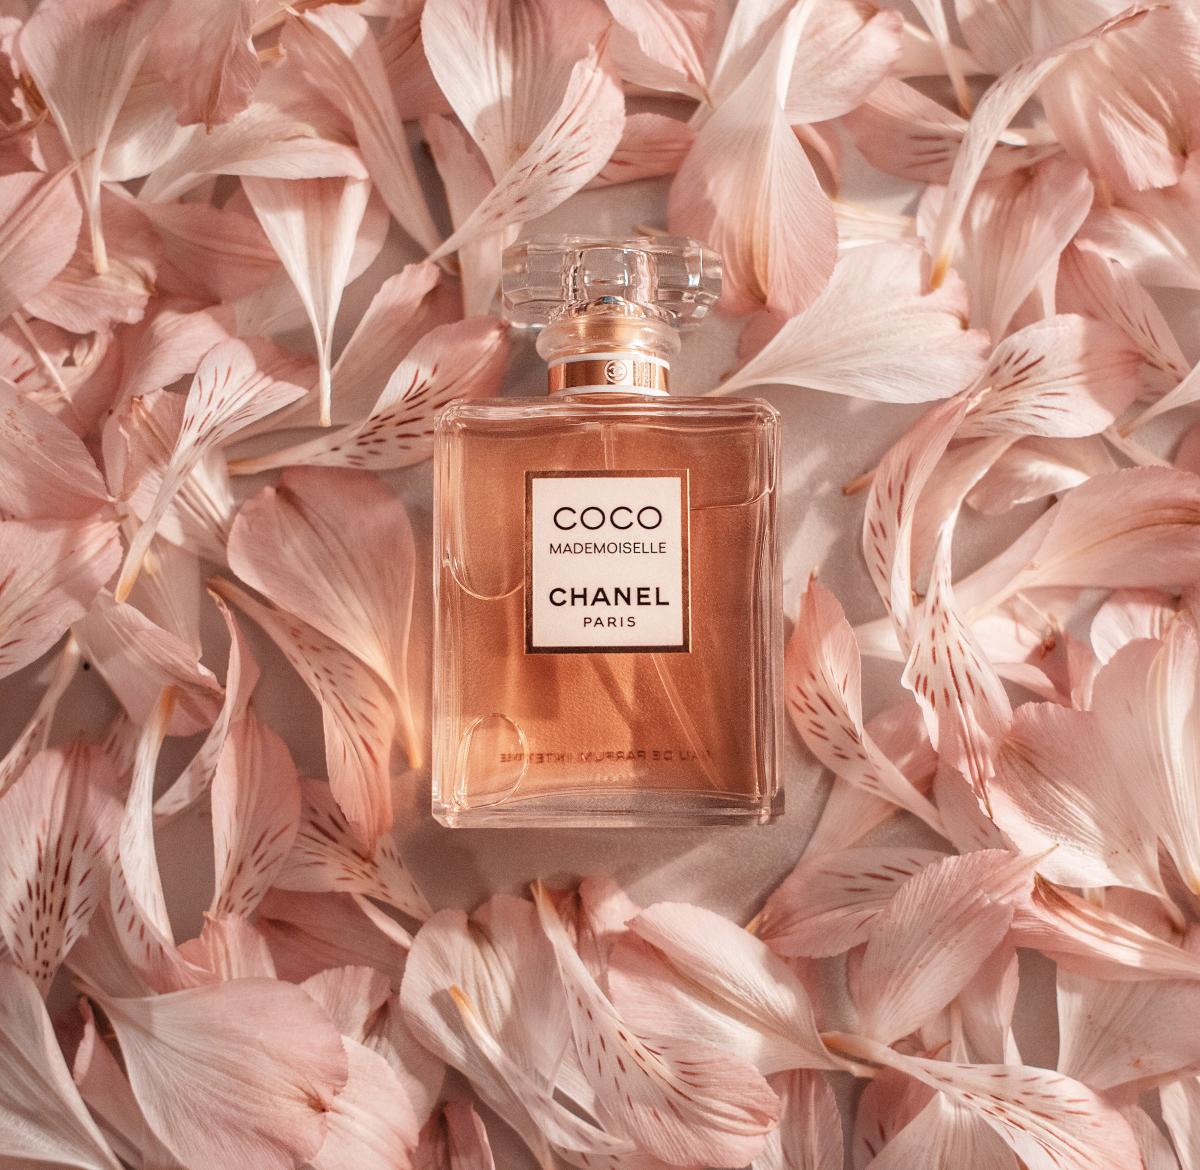 Chanel Coco Mademoiselle intense